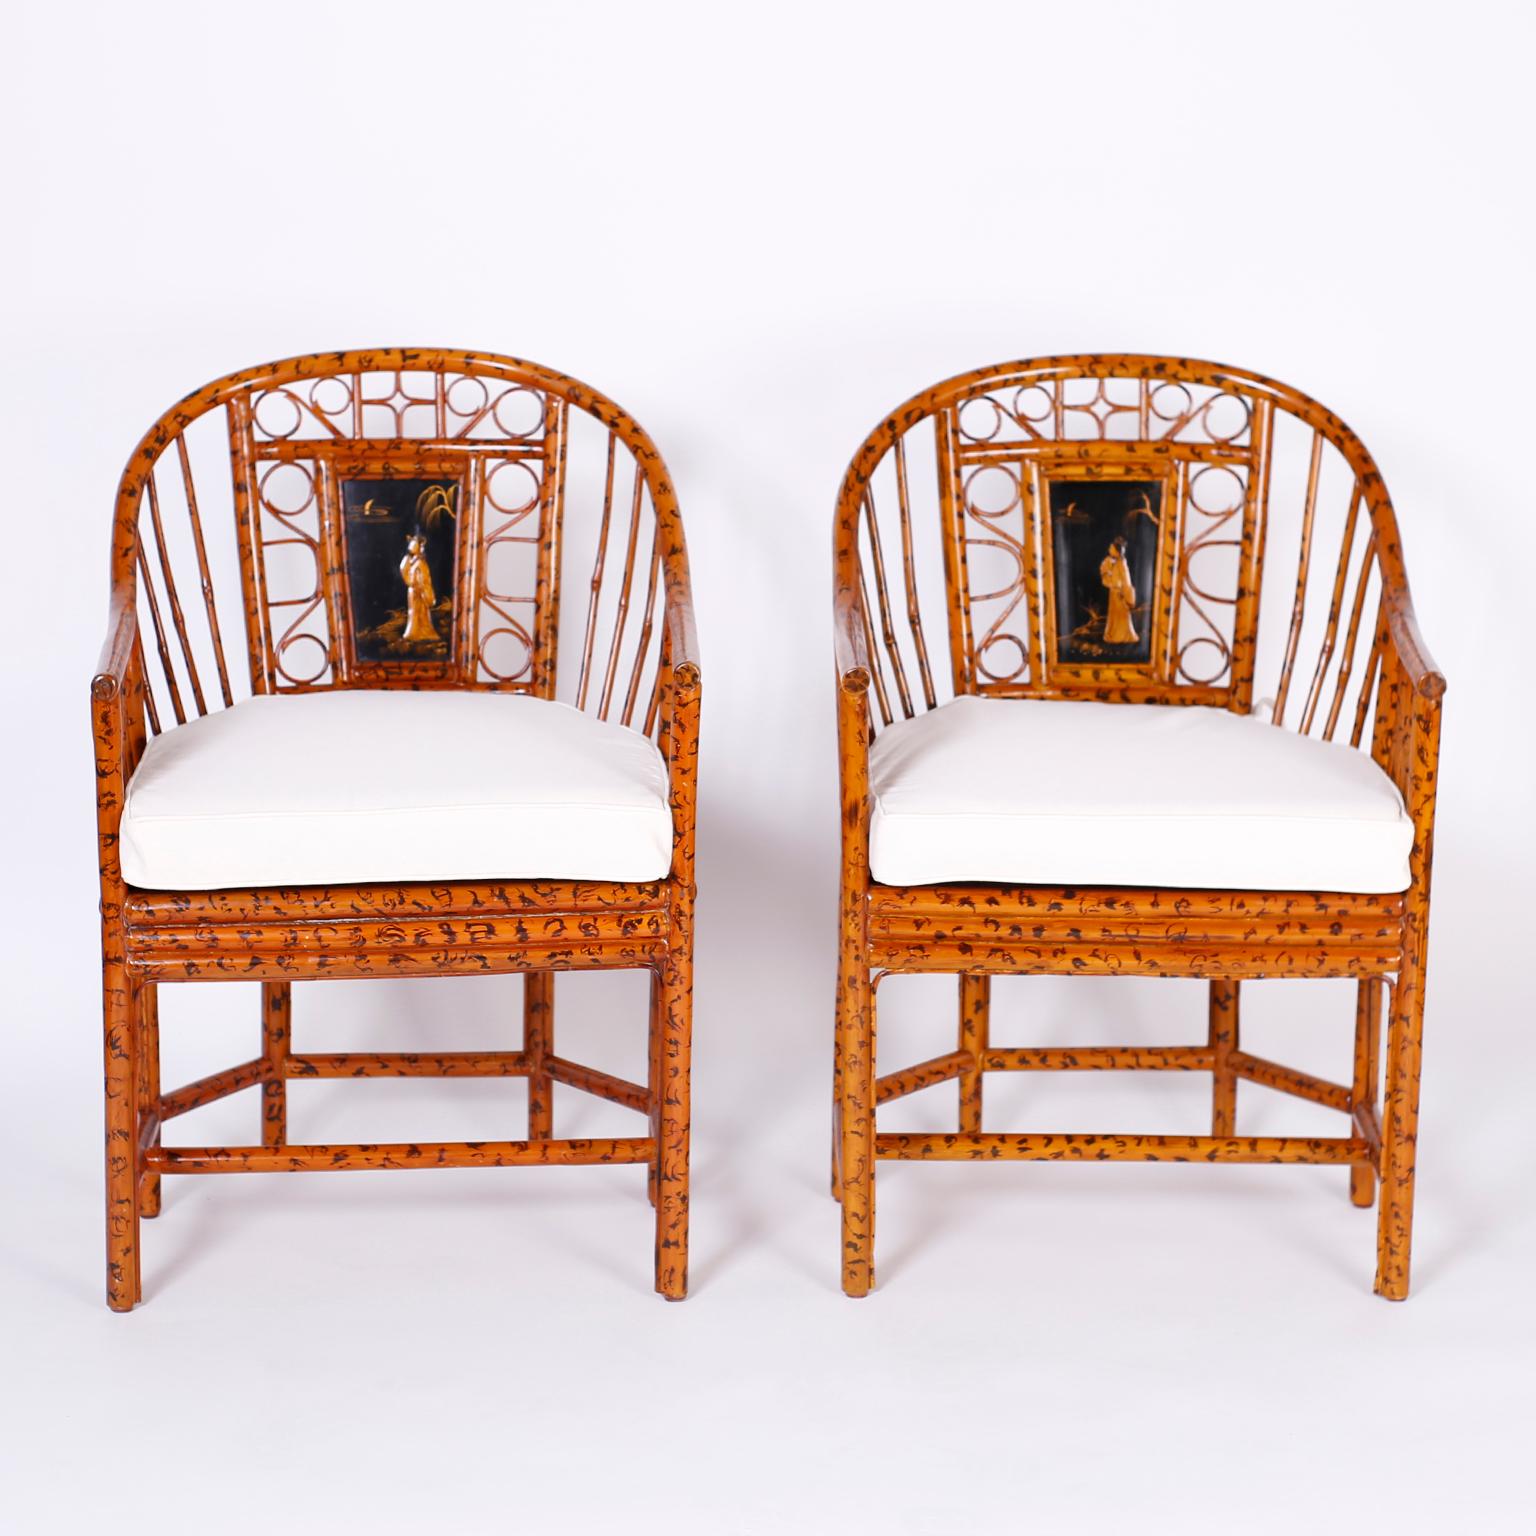 Handmade pair of Brighton Pavilion chairs with classic form featuring a faux burnt bamboo finish, caned seats, and lacquer panels with chinoiserie figures. Signed Maitland-Smith on the bottoms. 

Seat height without cushion is 18